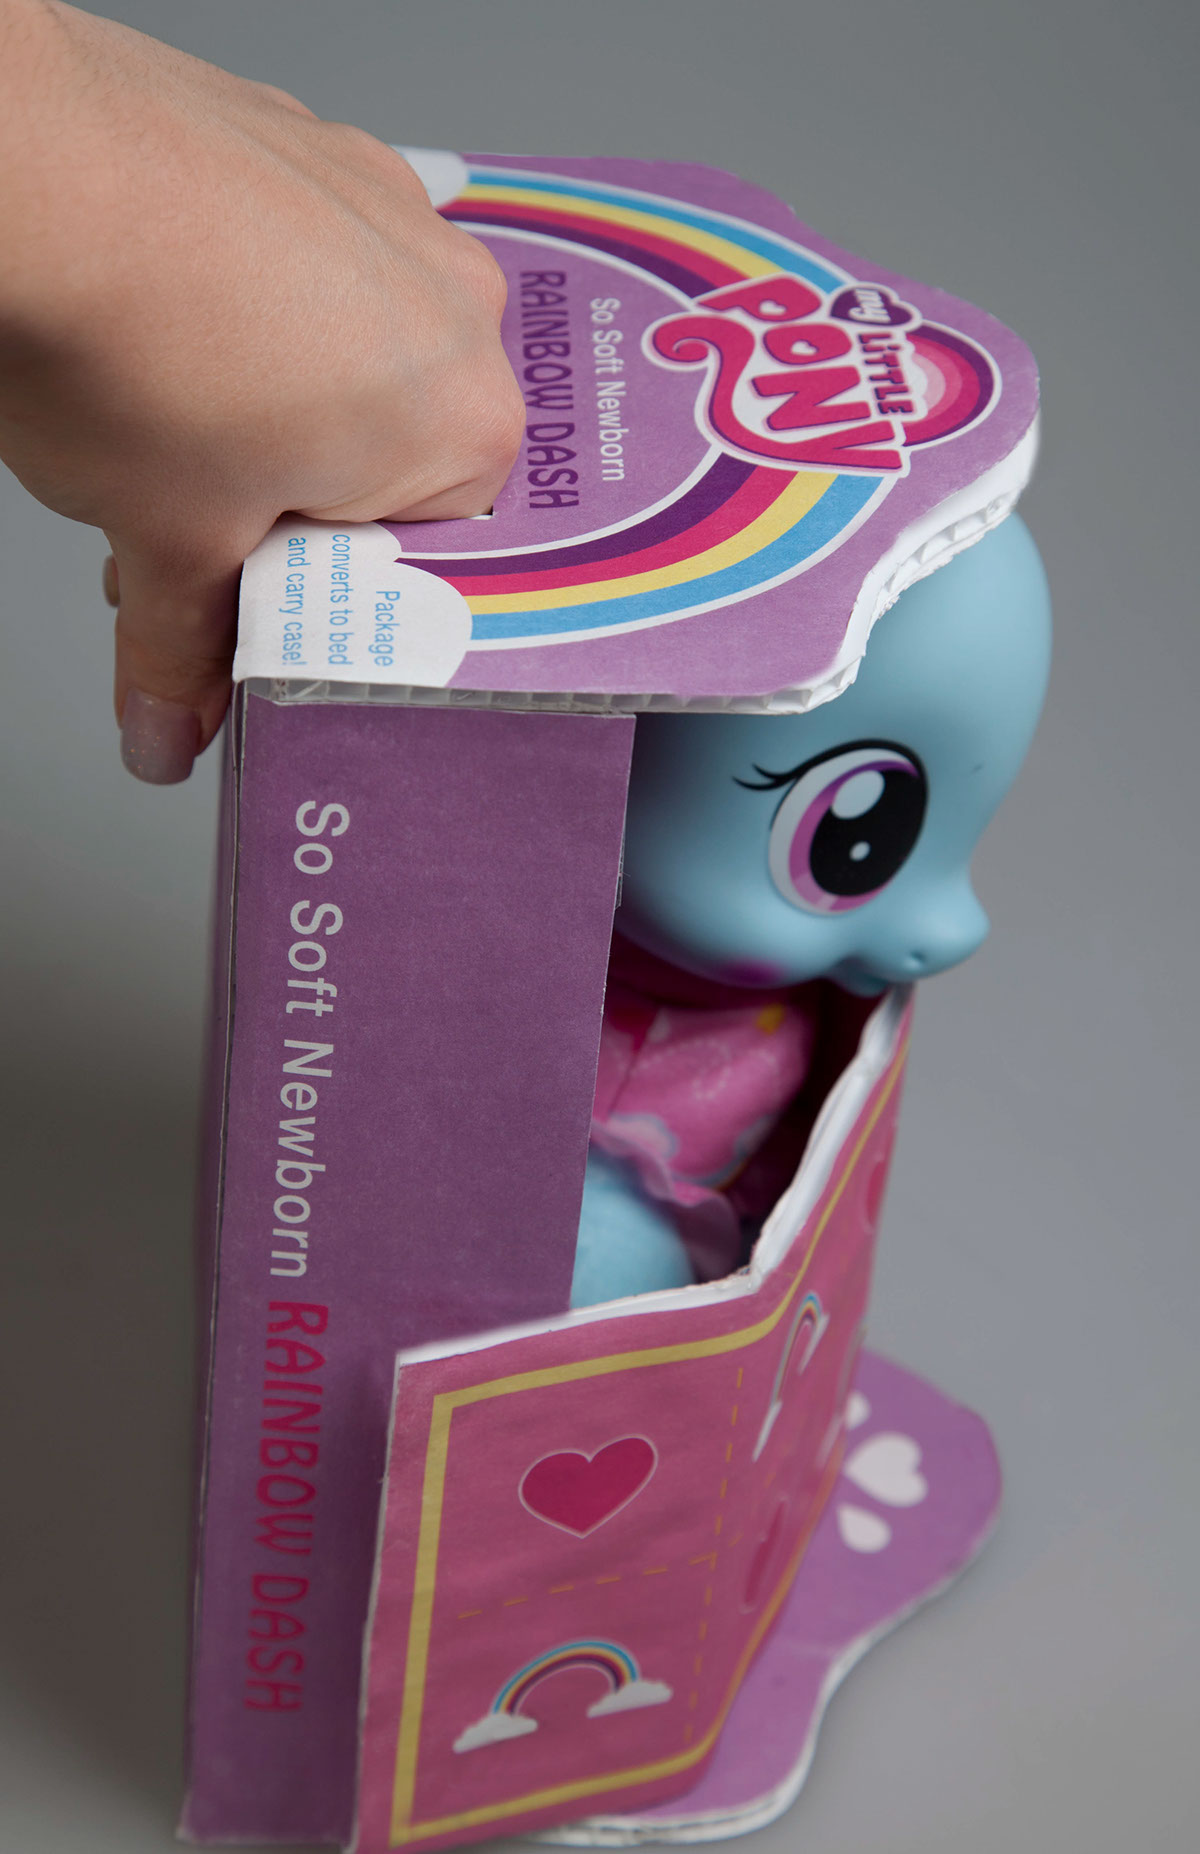 Hasbro redesign my little pony graphics rainbow bed time toy toy packaging Rainbowdash Functionality Elimination